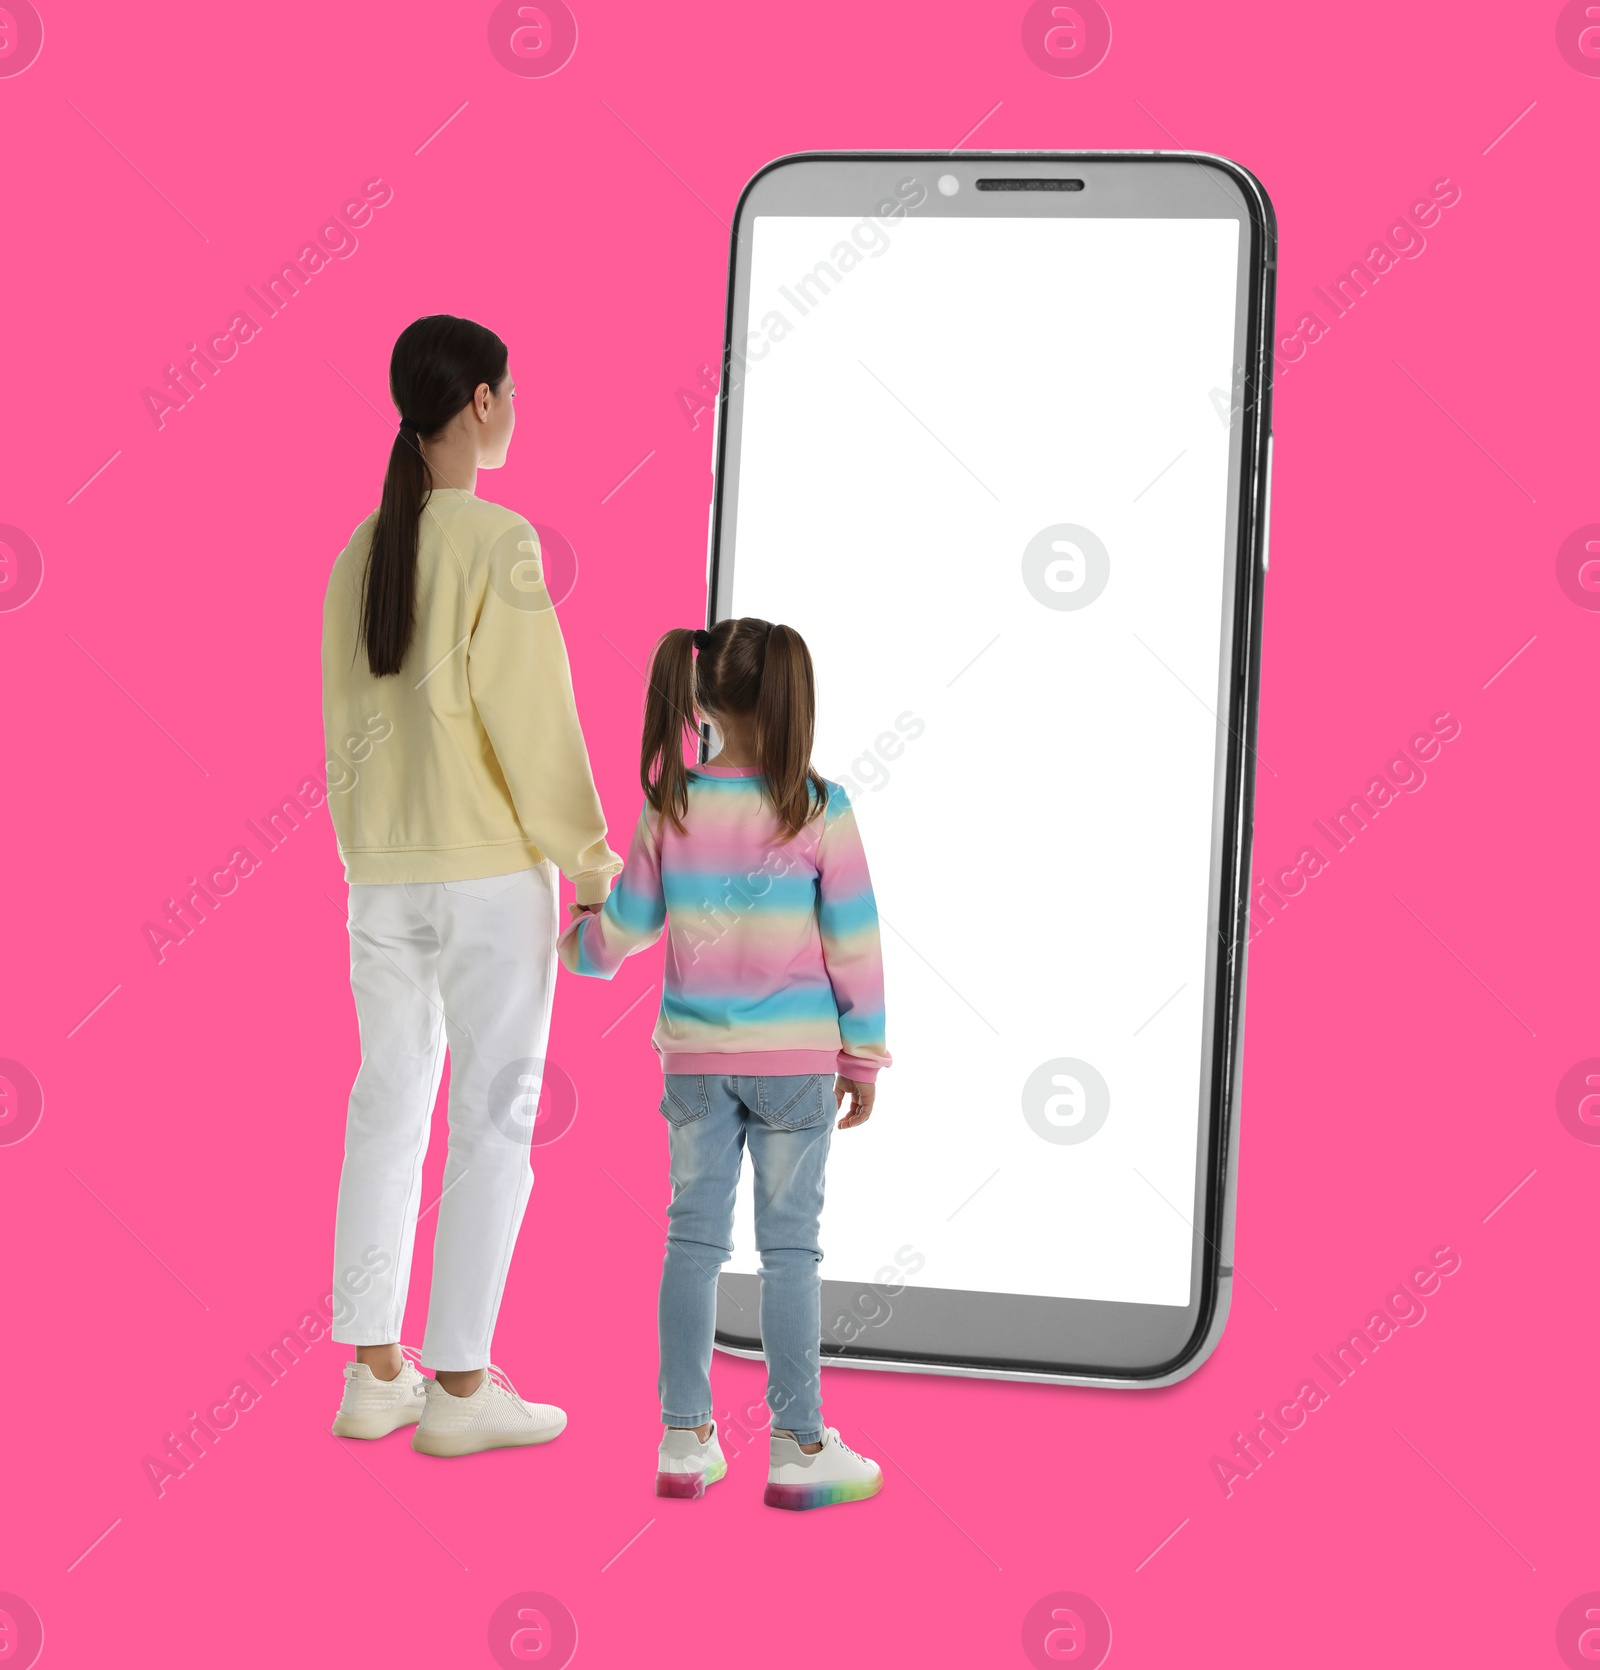 Image of Mother with her daughter standing in front of big smartphone on pink background